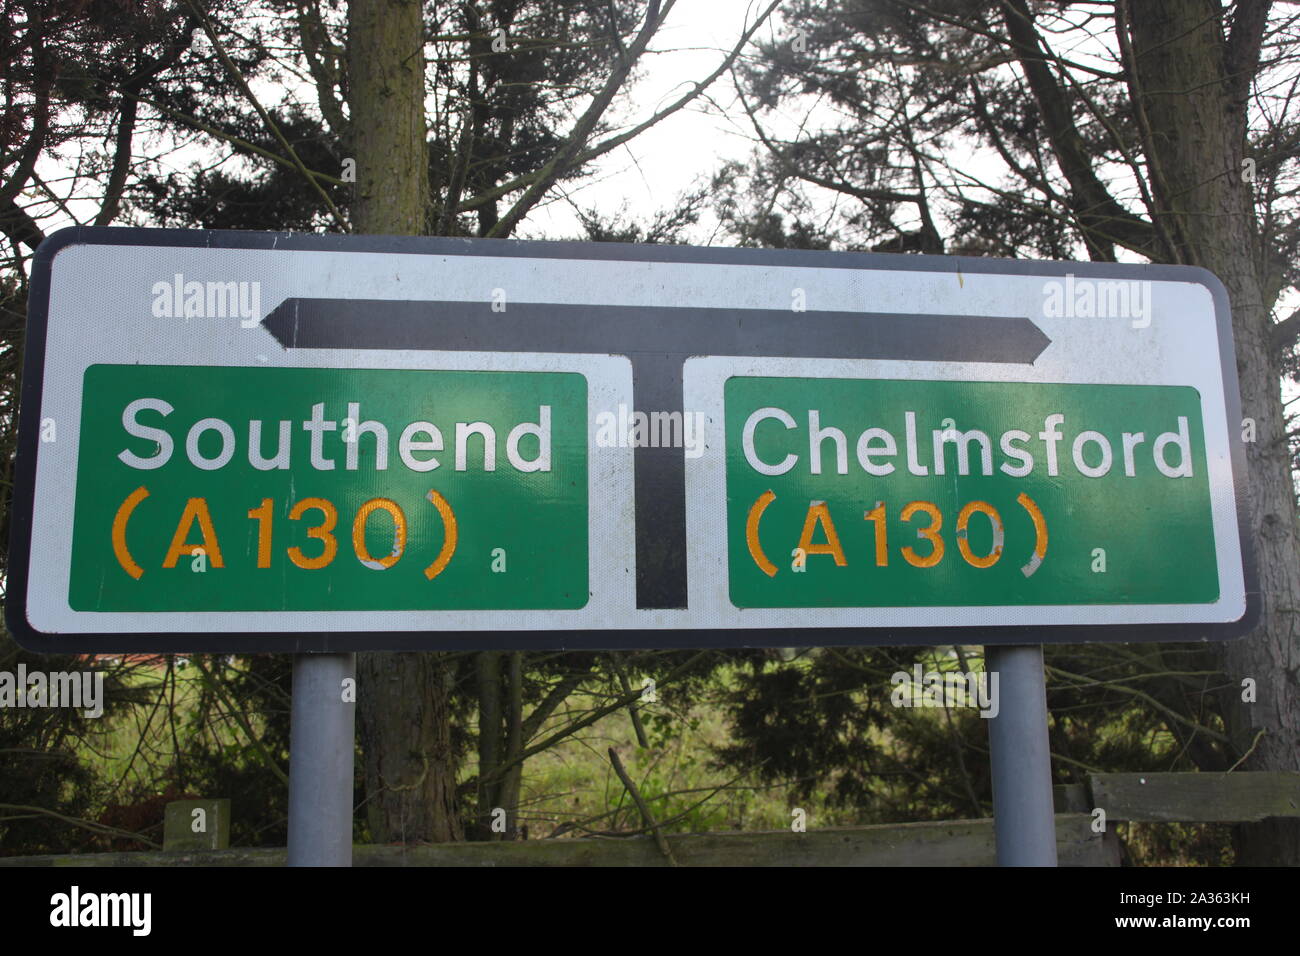 Essex Travel & Roads - Road sign on a section of the A130 with directions to Southend and Chelmsford Routes. Essex, Britain. Stock Photo